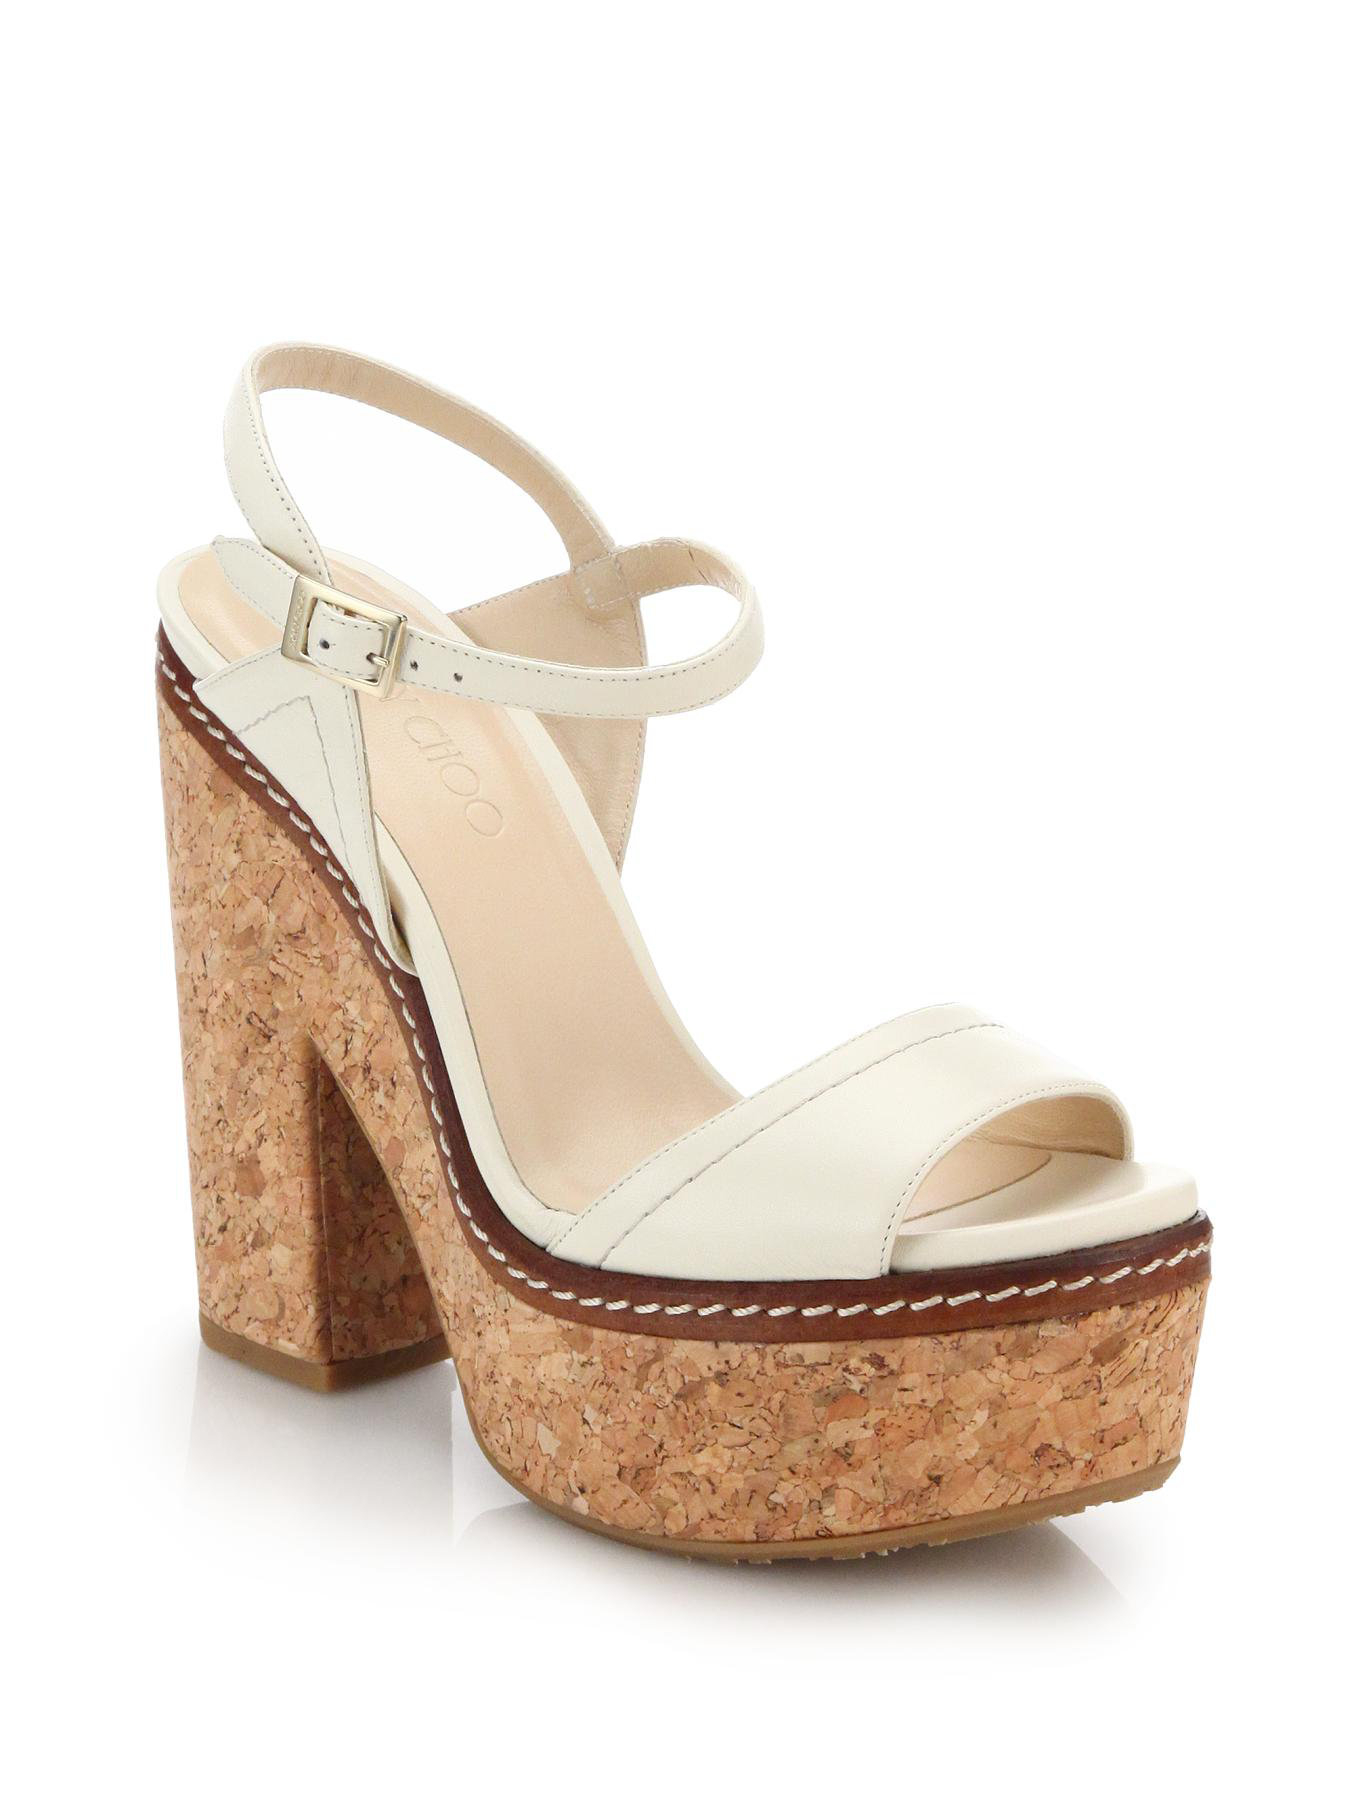 Lyst - Jimmy choo Naylor Cork-heeled Leather Sandals in White